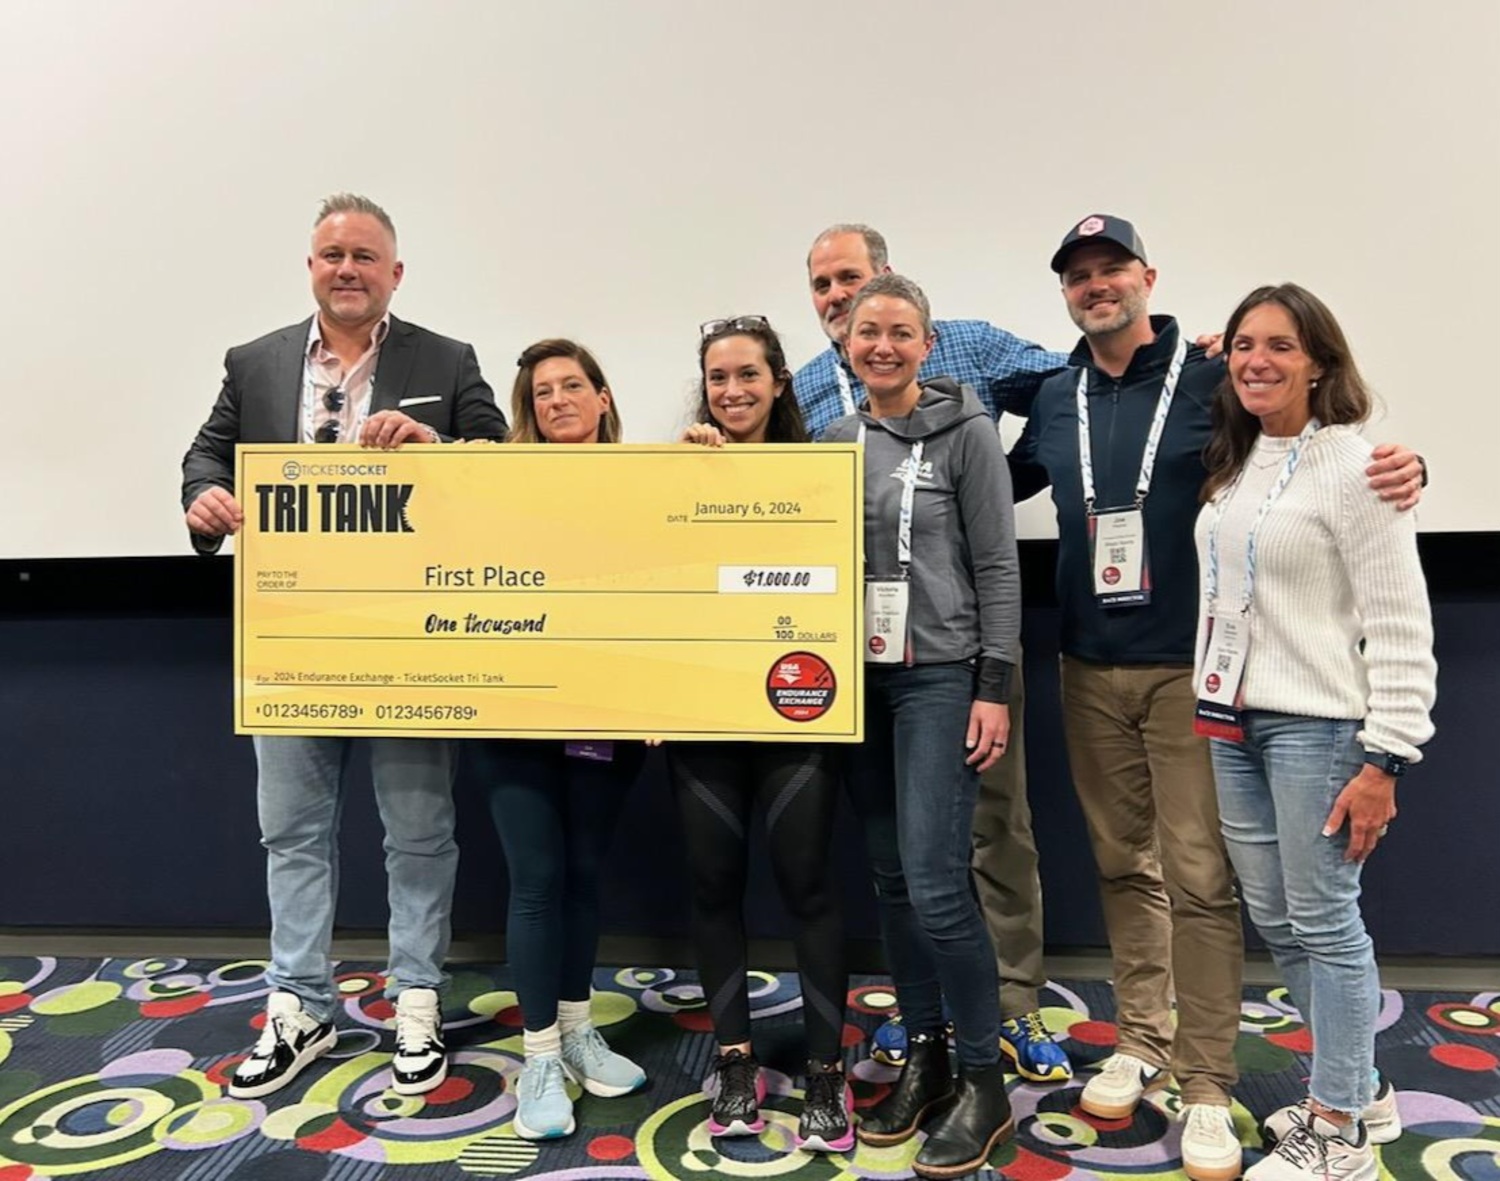 Kai Blache from Ticketsocket, Theresa Roden and Samantha Rothberg with i-tri,  Victoria Brumfield, CEO of USA Triathlon, and additional members of the USA Triathlon team, after i-tri's pitch took the top prize at the conference. COURTESY I-TRI